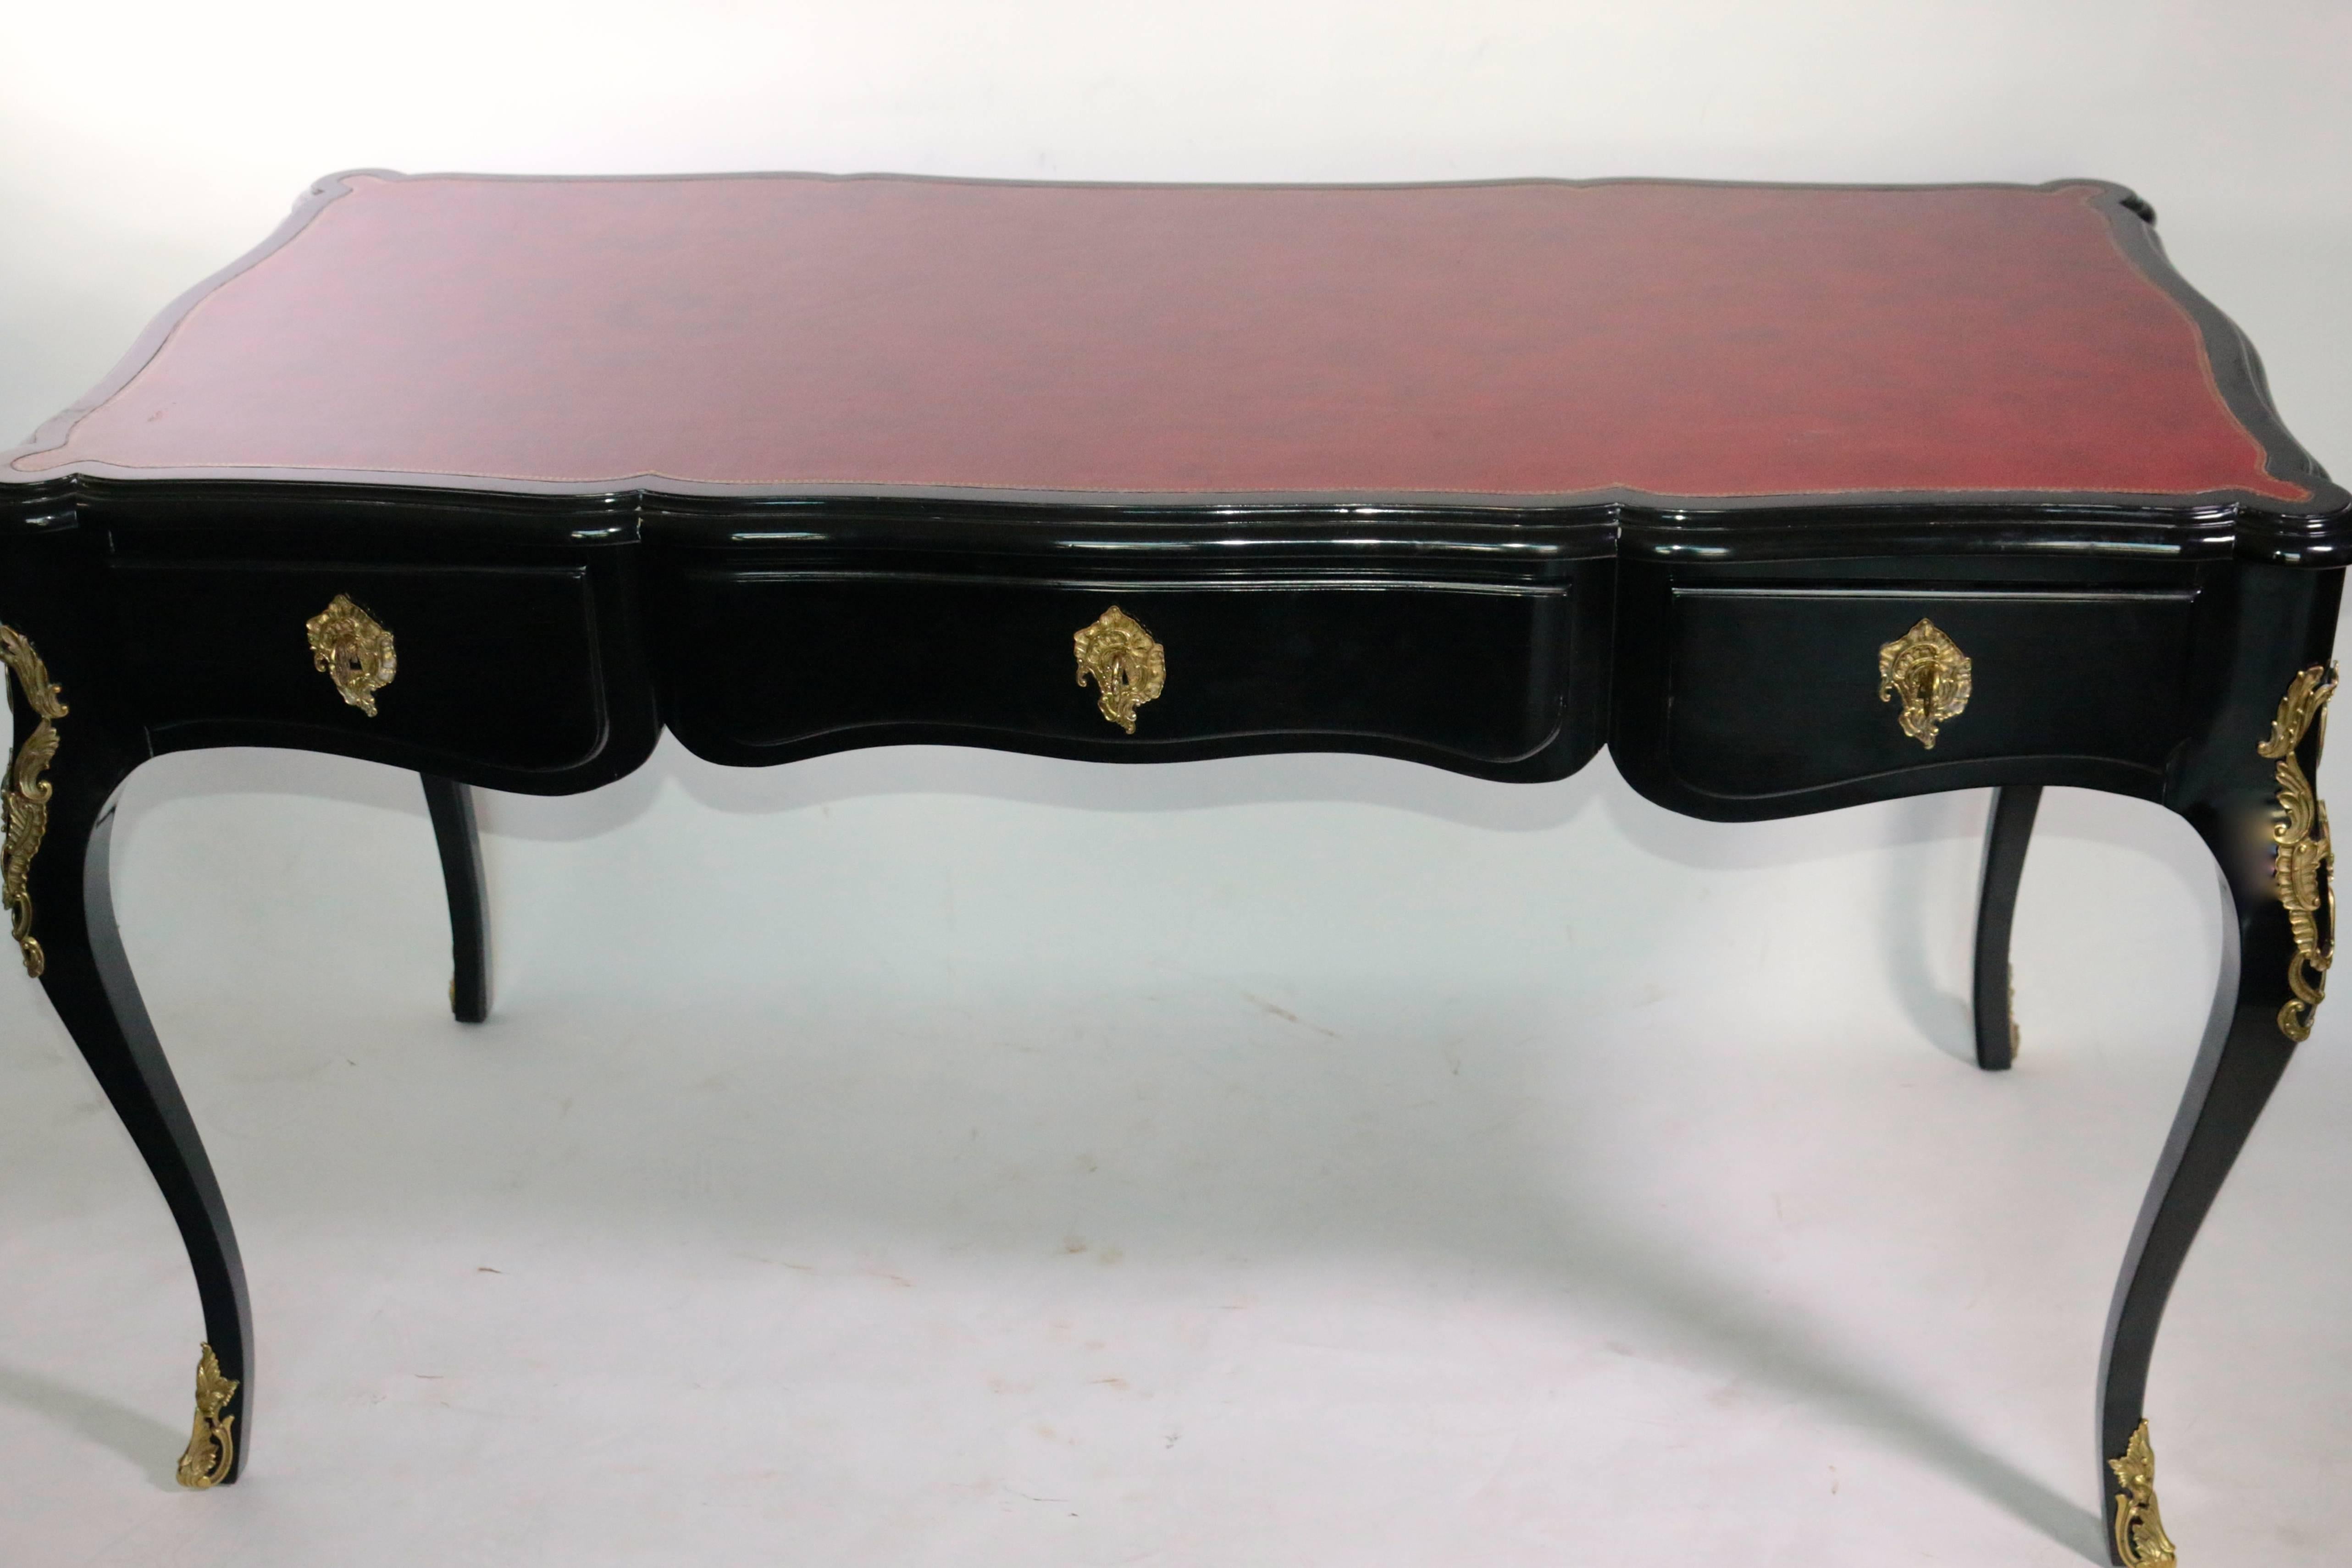 20th Century Ralph Lauren Lacquer Leather Top Writing Table Desk, Property of Tommy Hilfiger